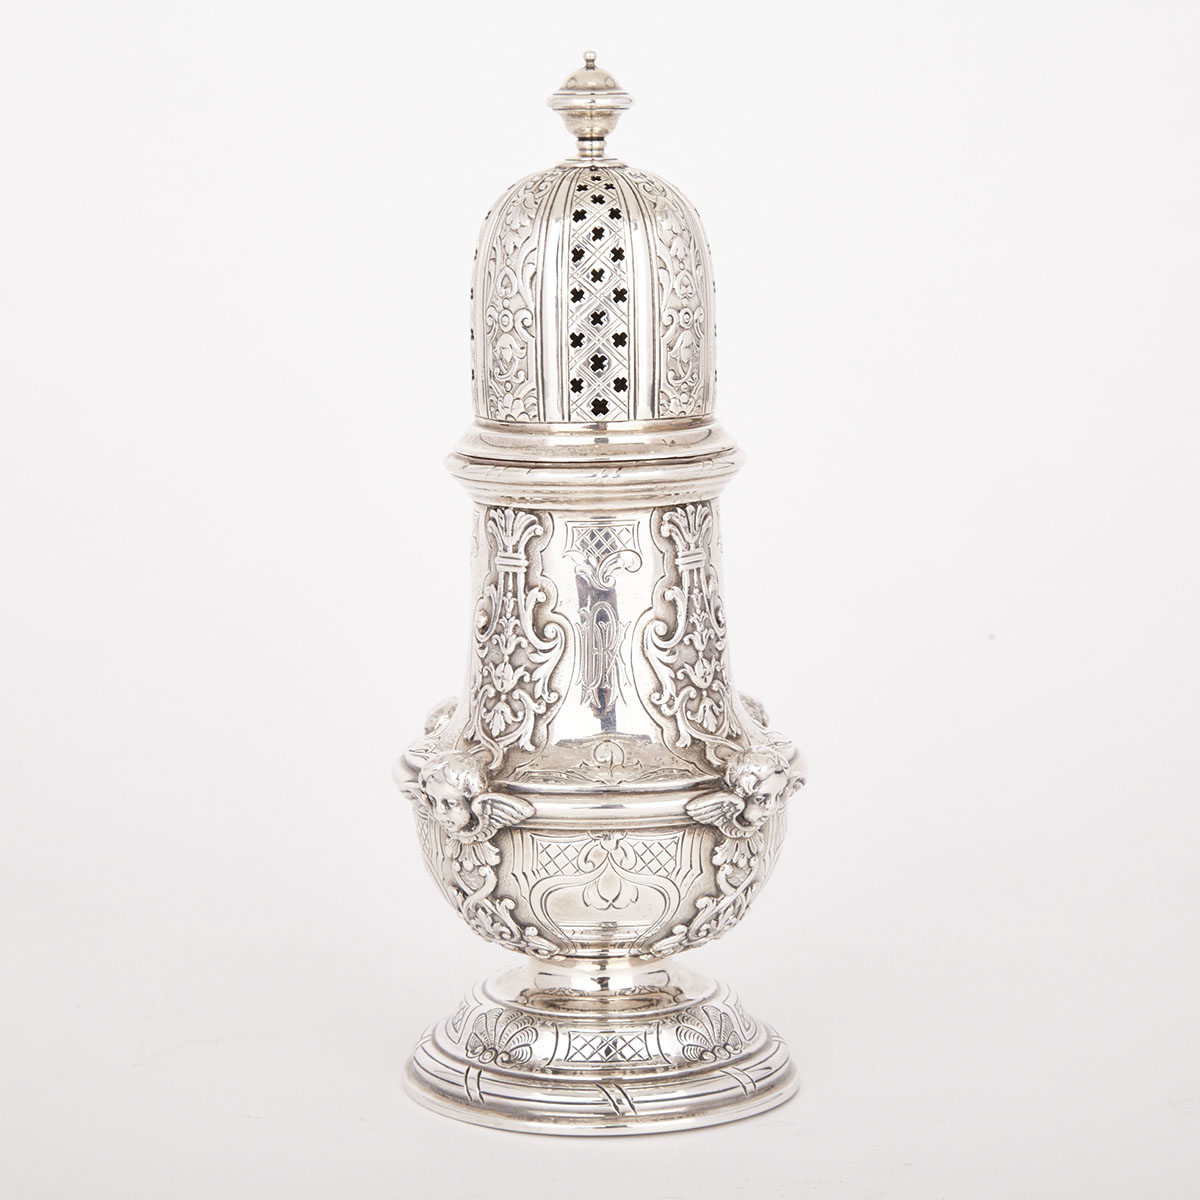 American Silver Sugar Caster, Gorham Mfg. Co., Providence, R.I., early 20th century